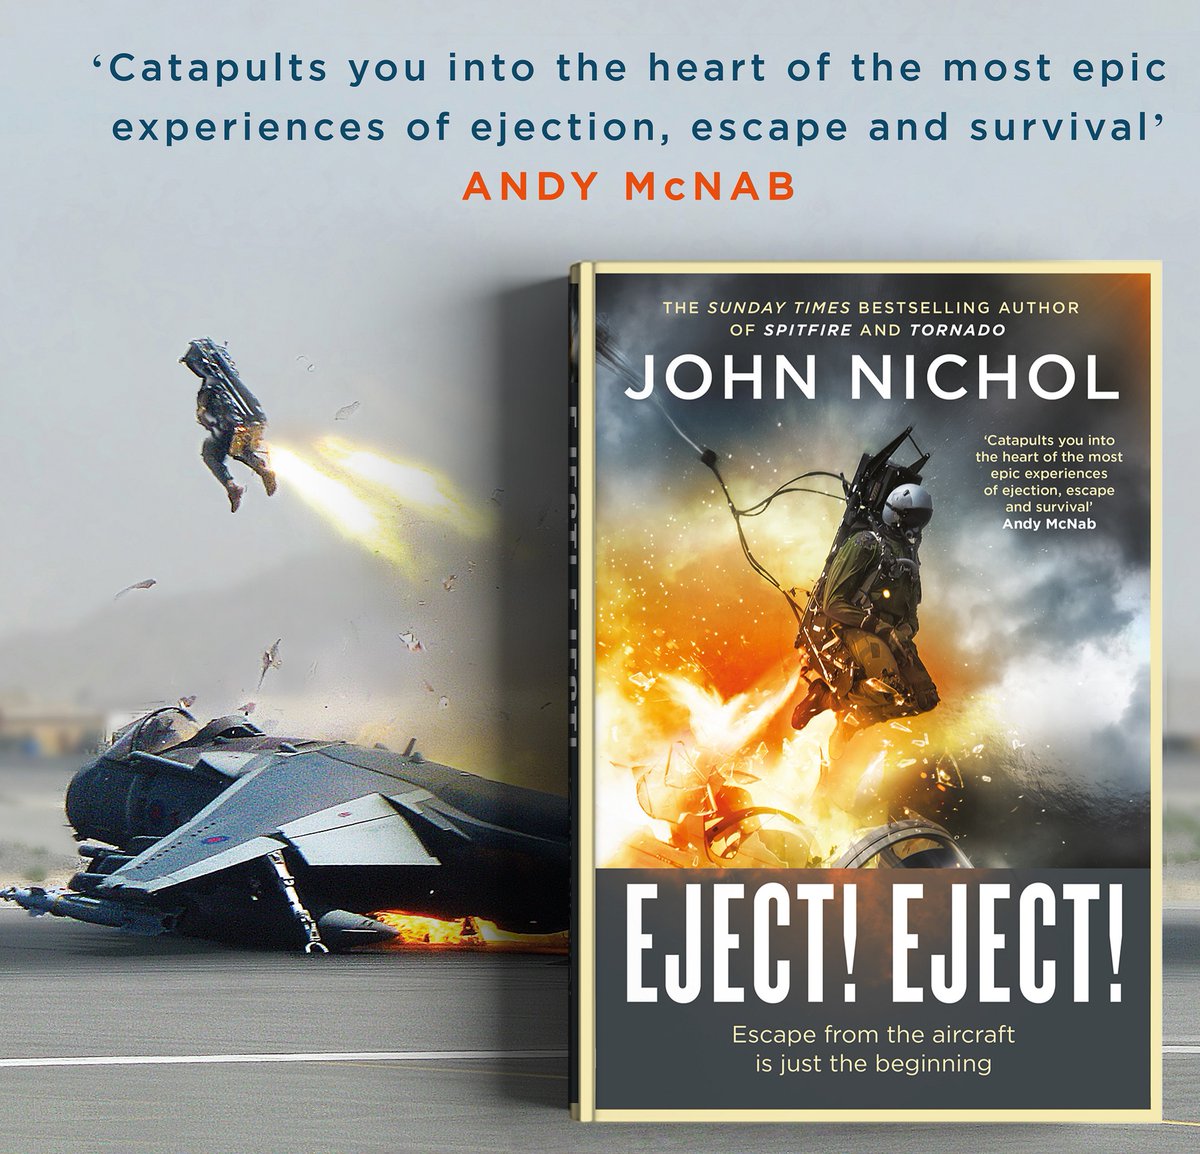 Let's start the weekend off with a BANG (seat) ‼️ with a RT competition! RT for chance to win the FIRST signed copy of EJECT! EJECT! when it comes out on 25 May. Because pulling the yellow & black ejection handle is just the start of the story...🟨⬛️🟨⬛️🟨 amazon.co.uk/Eject-John-Nic…